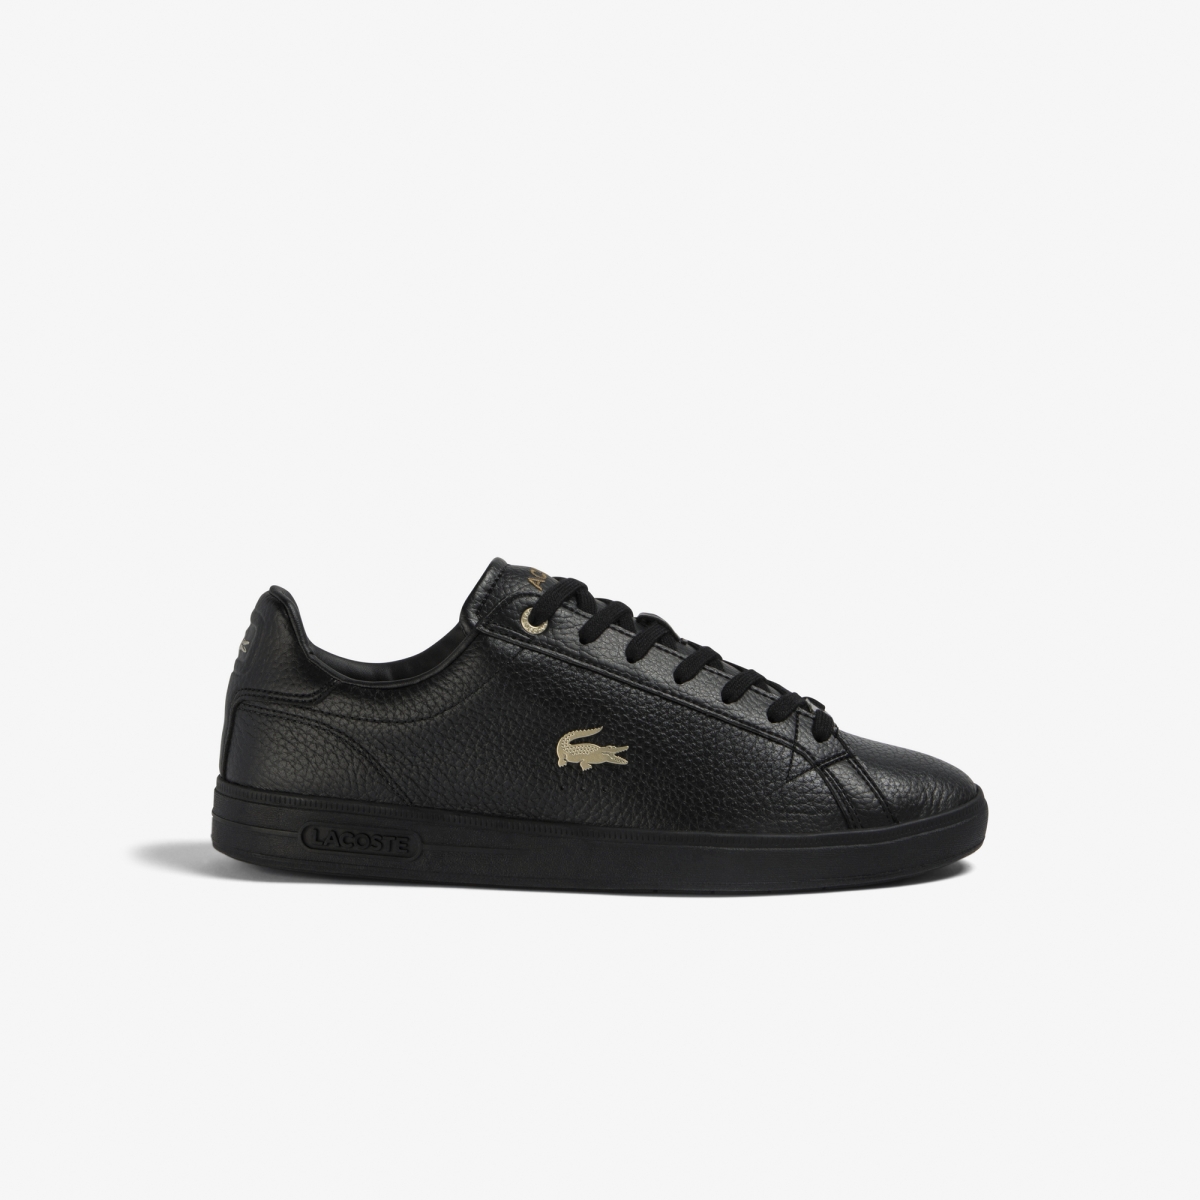 Buy Lacoste Black G80 Leather Trainer Sneakers for Men Online @ Tata CLiQ